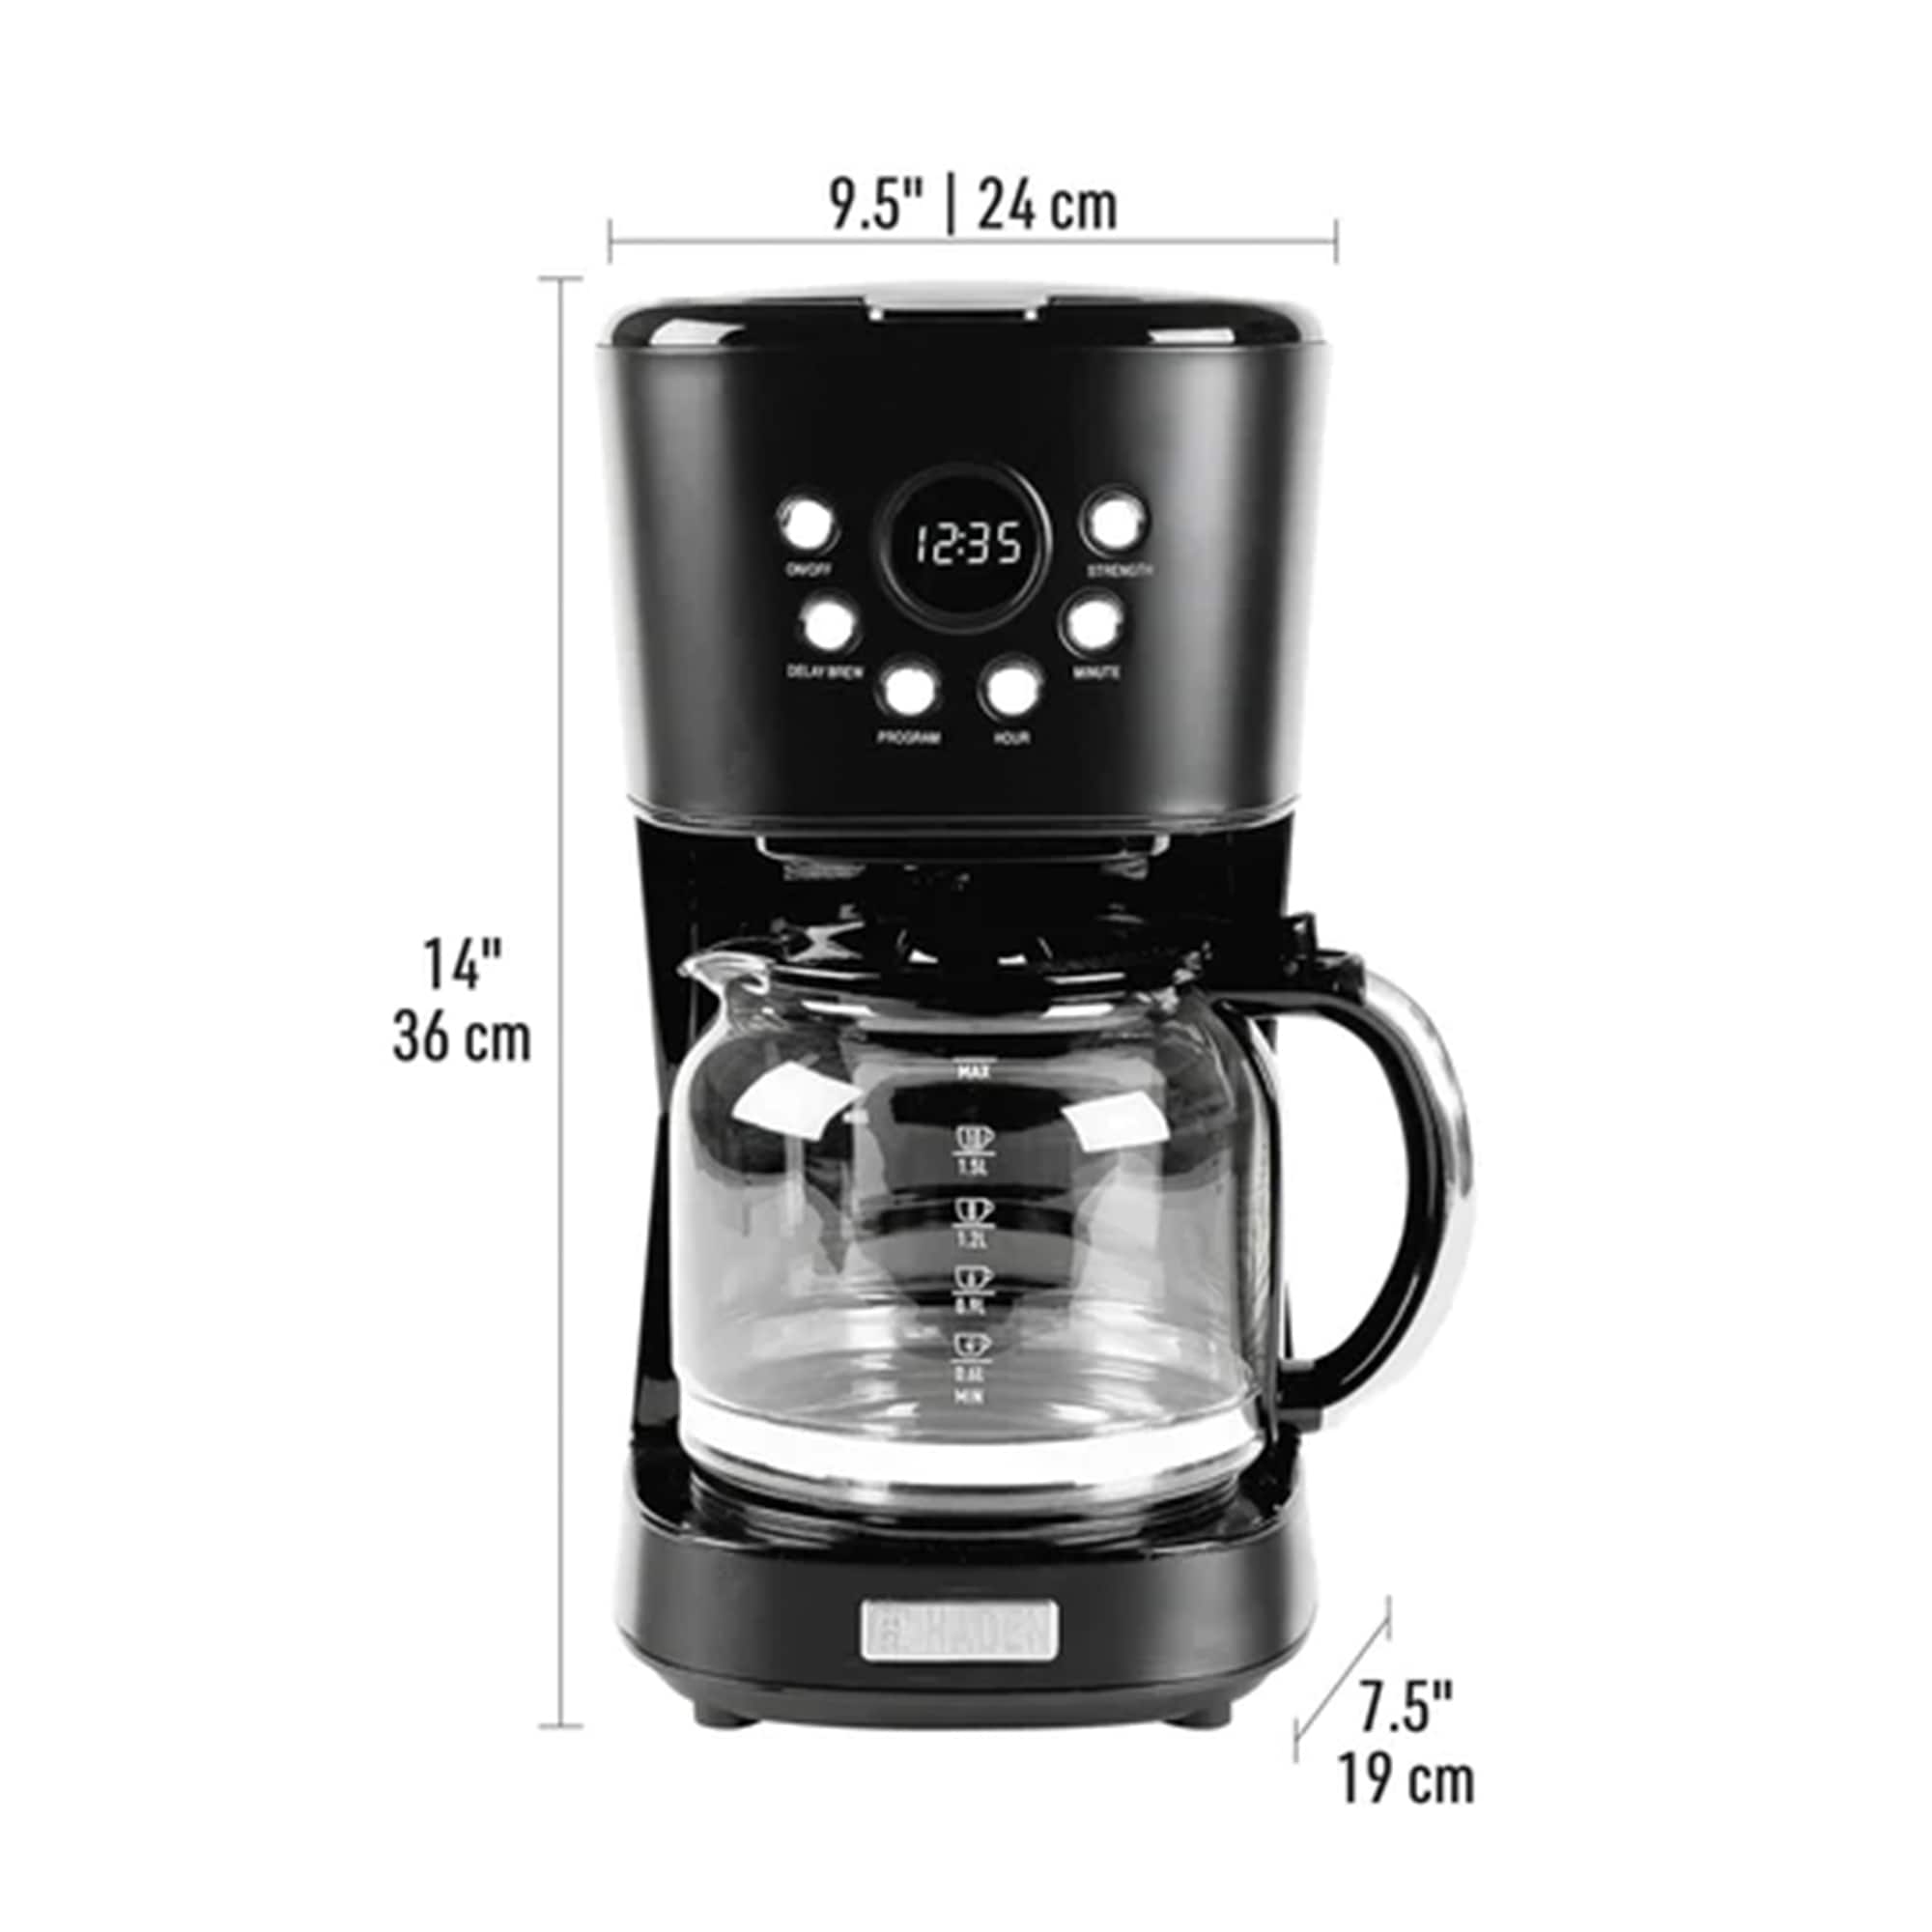 https://ak1.ostkcdn.com/images/products/is/images/direct/910c94d7cf3e4f2fb42d01561a328214c2683cd9/Haden-Heritage-12-Cup-Programmable-Retro-Coffee-Maker-Machine%2C-Black-Chrome.jpg